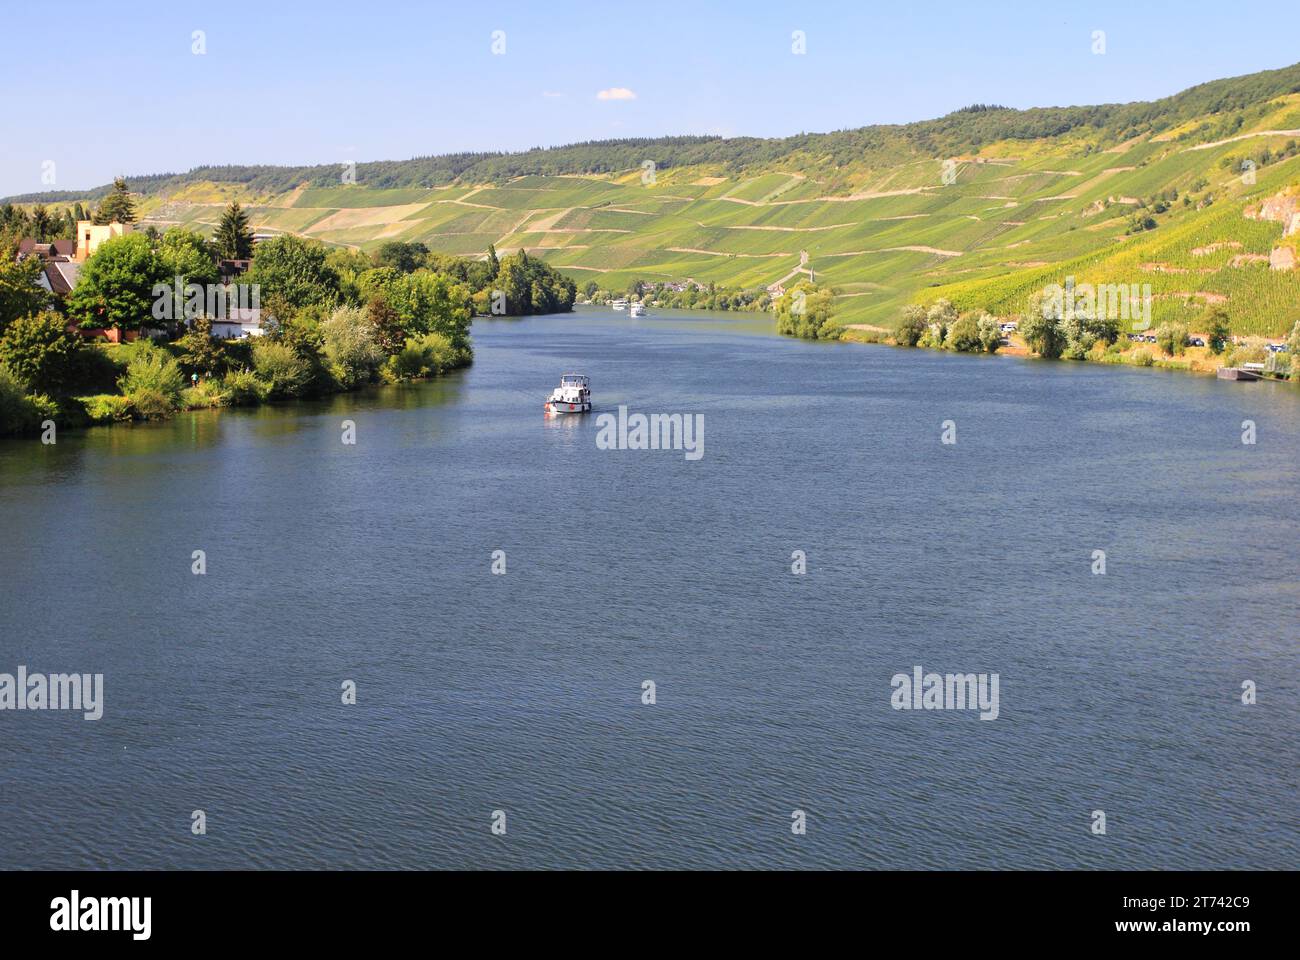 Bernkastel-Kues, is a town on the Middle Moselle, Germany Stock Photo